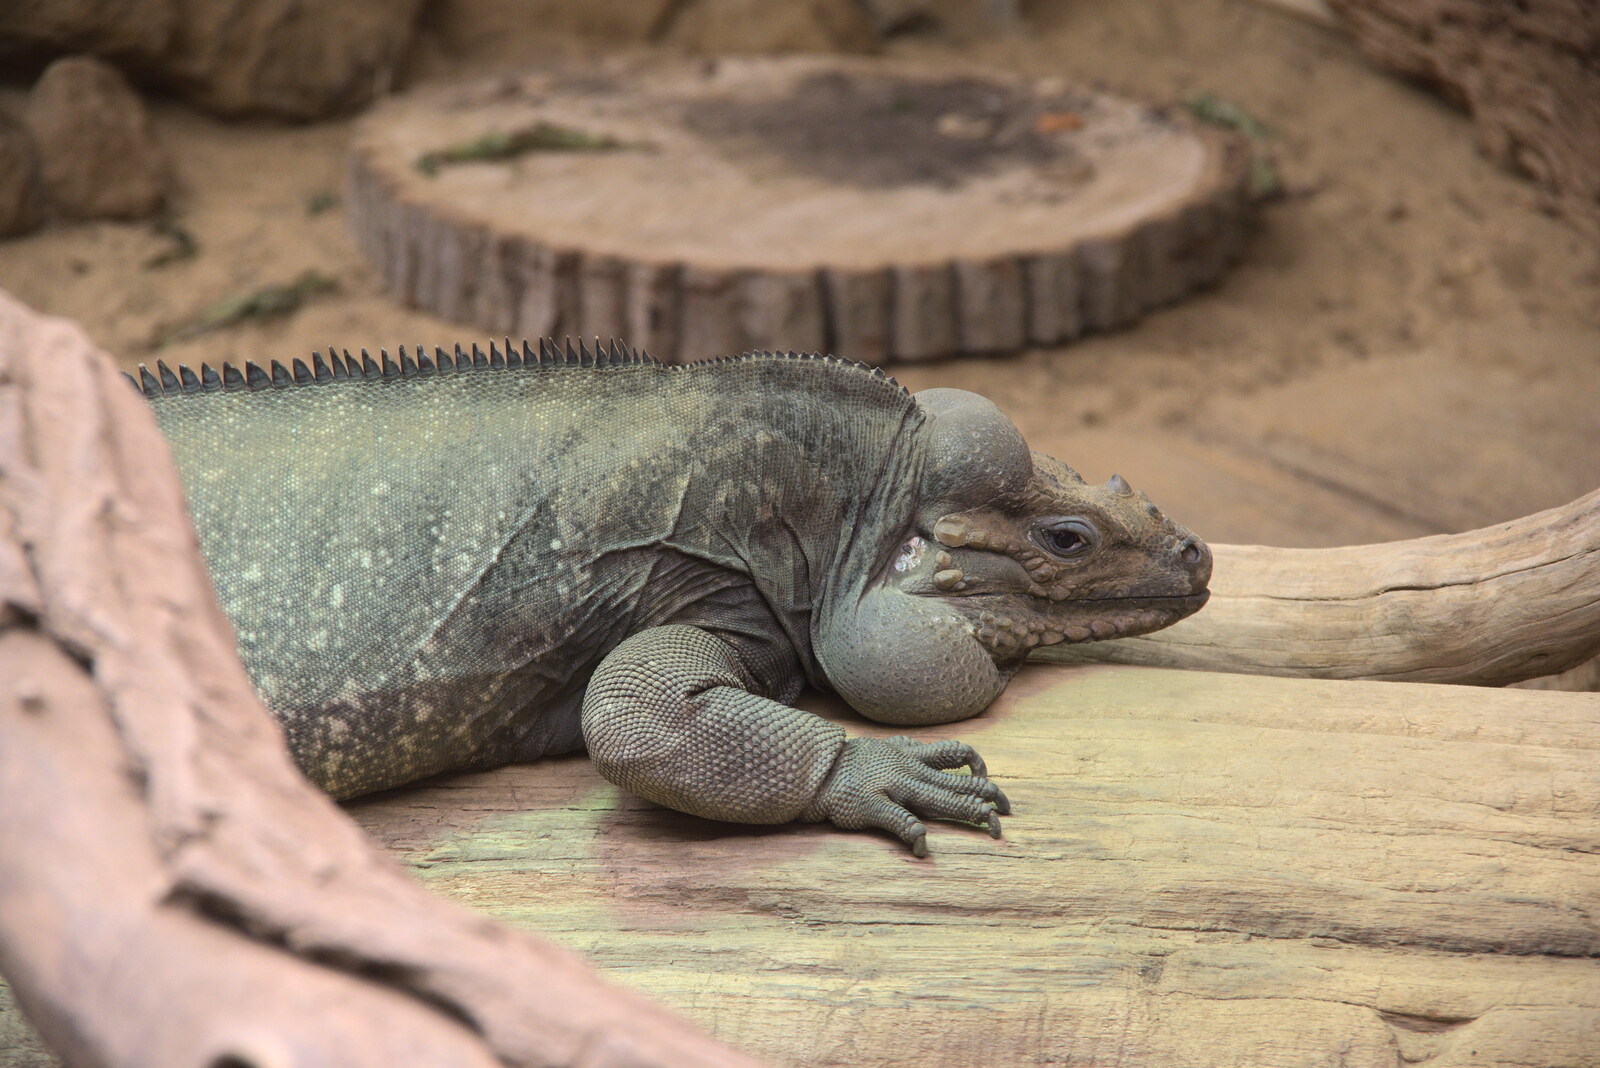 A big lizard looks very bored from A Moth Infestation and a Trip to the Zoo, Banham, Norfolk - 21st May 2022